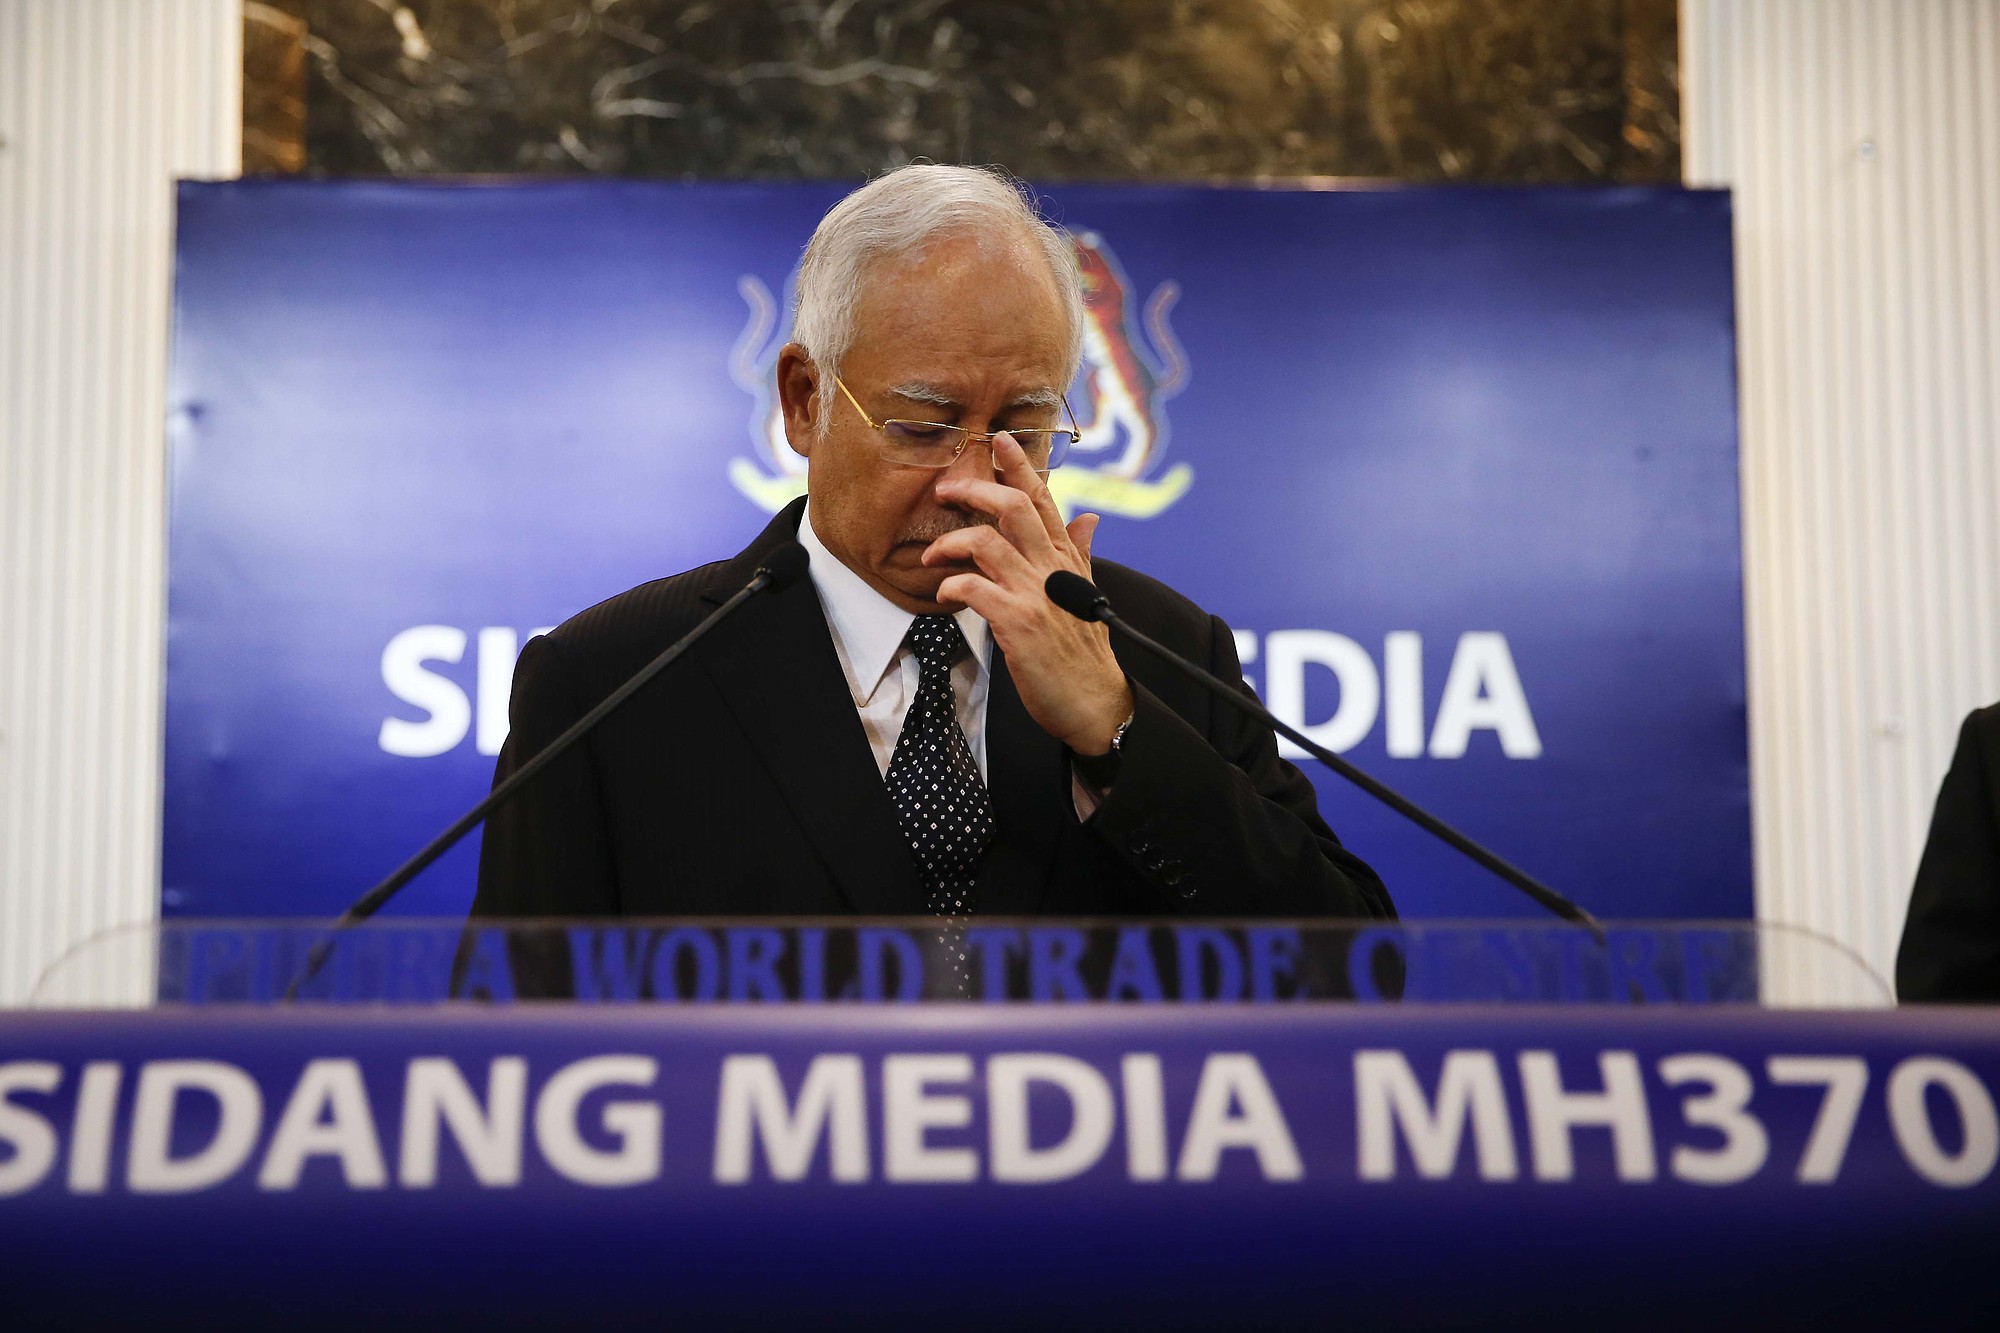 Malaysian Prime Minister Najib Razak, center, gestures before speaking at a special press conference announcing the findings for the ill fated flight MH370 in Kuala Lumpur, Malaysia, early Thursday.